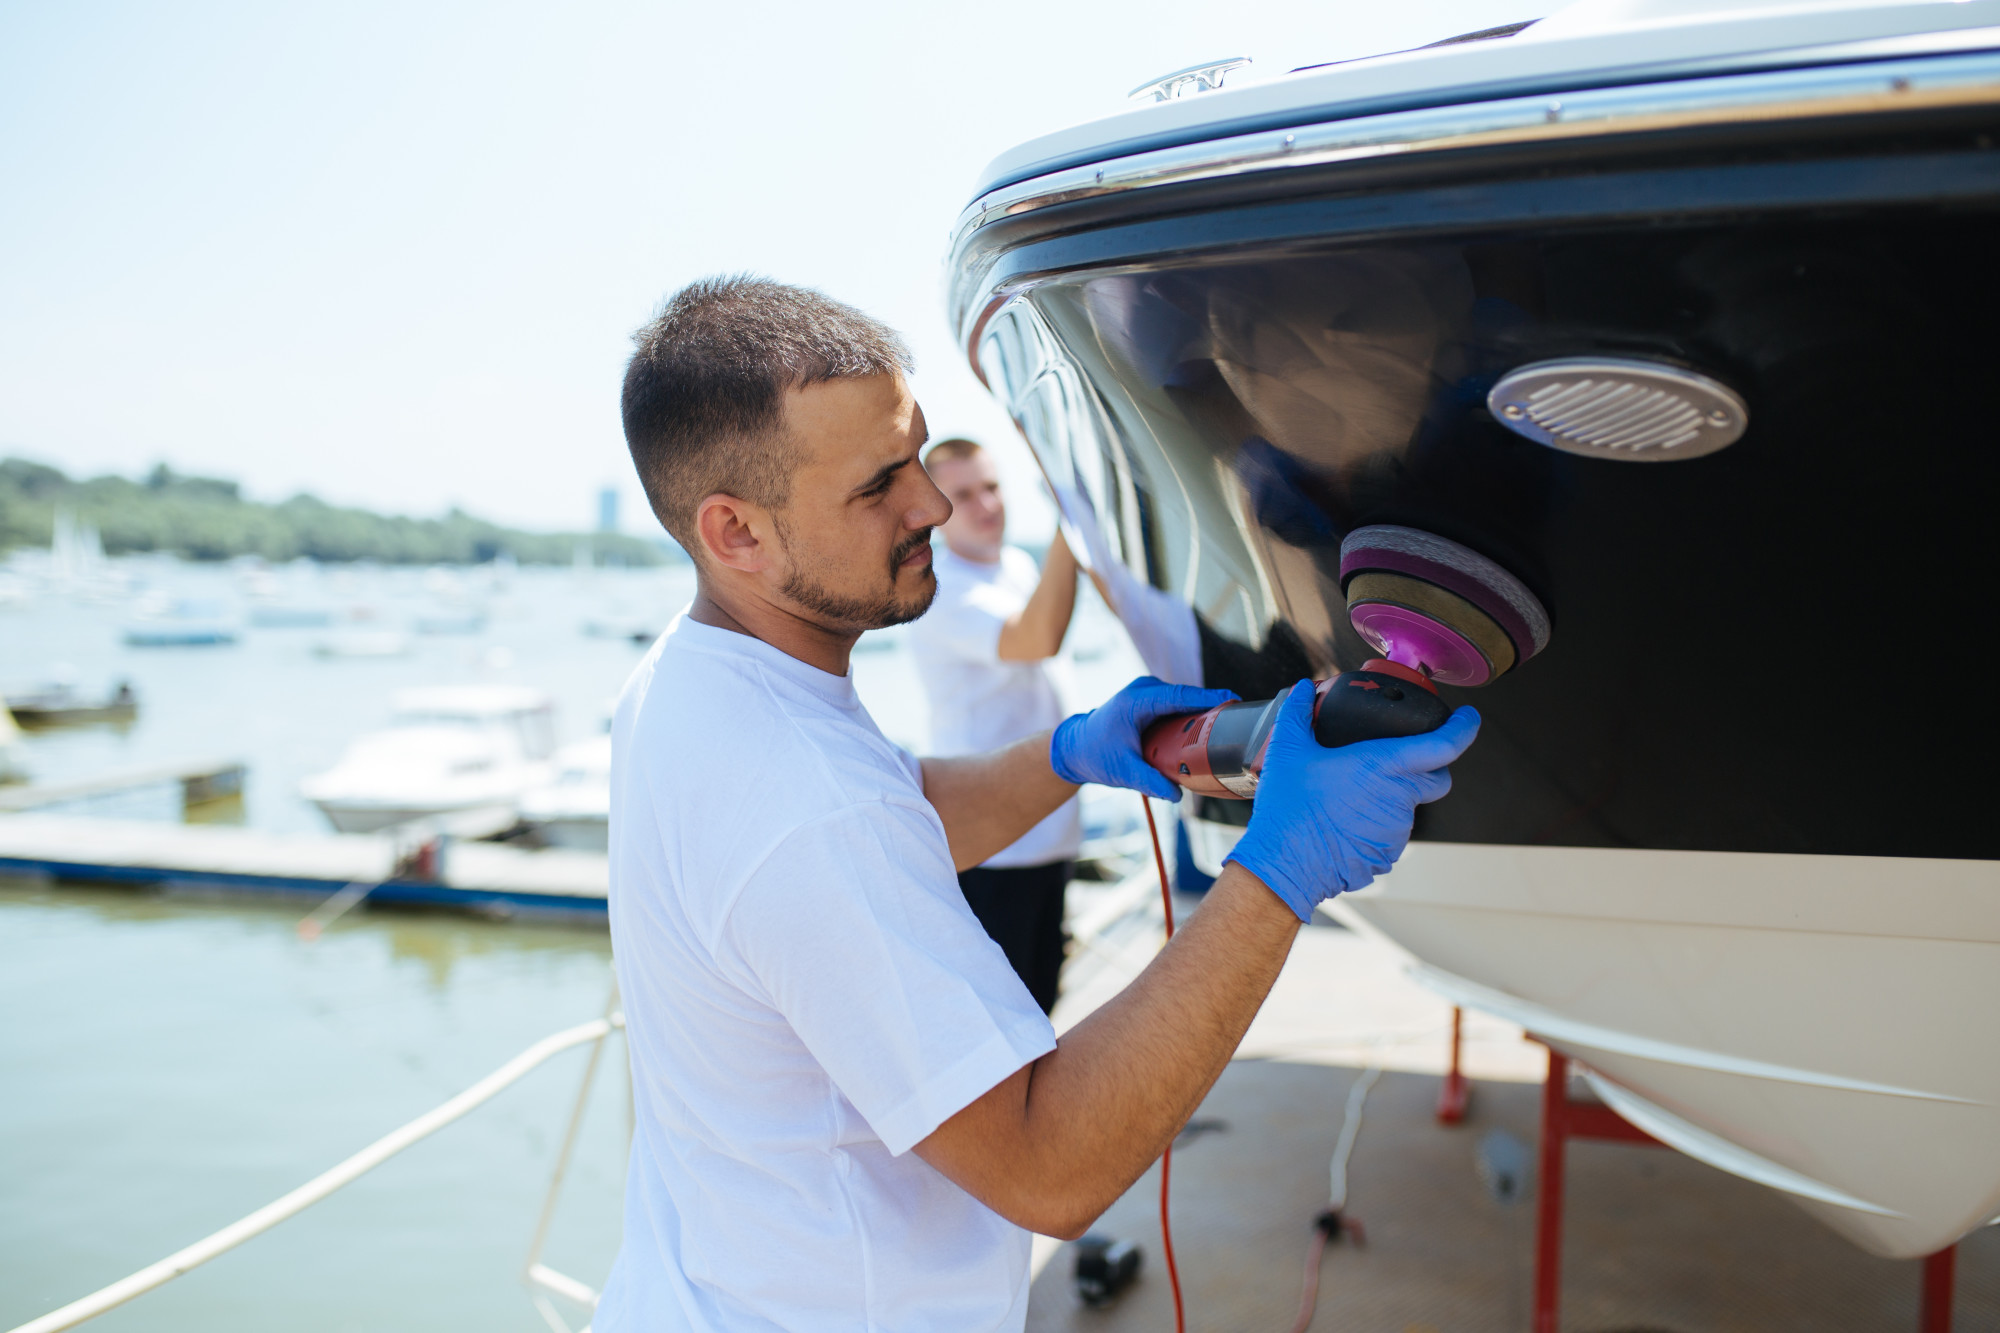 Important Boat Maintenance Tips for Superior Performance » Trending Us - 8426cfbf7af7D9fee74e098Dba3b771f